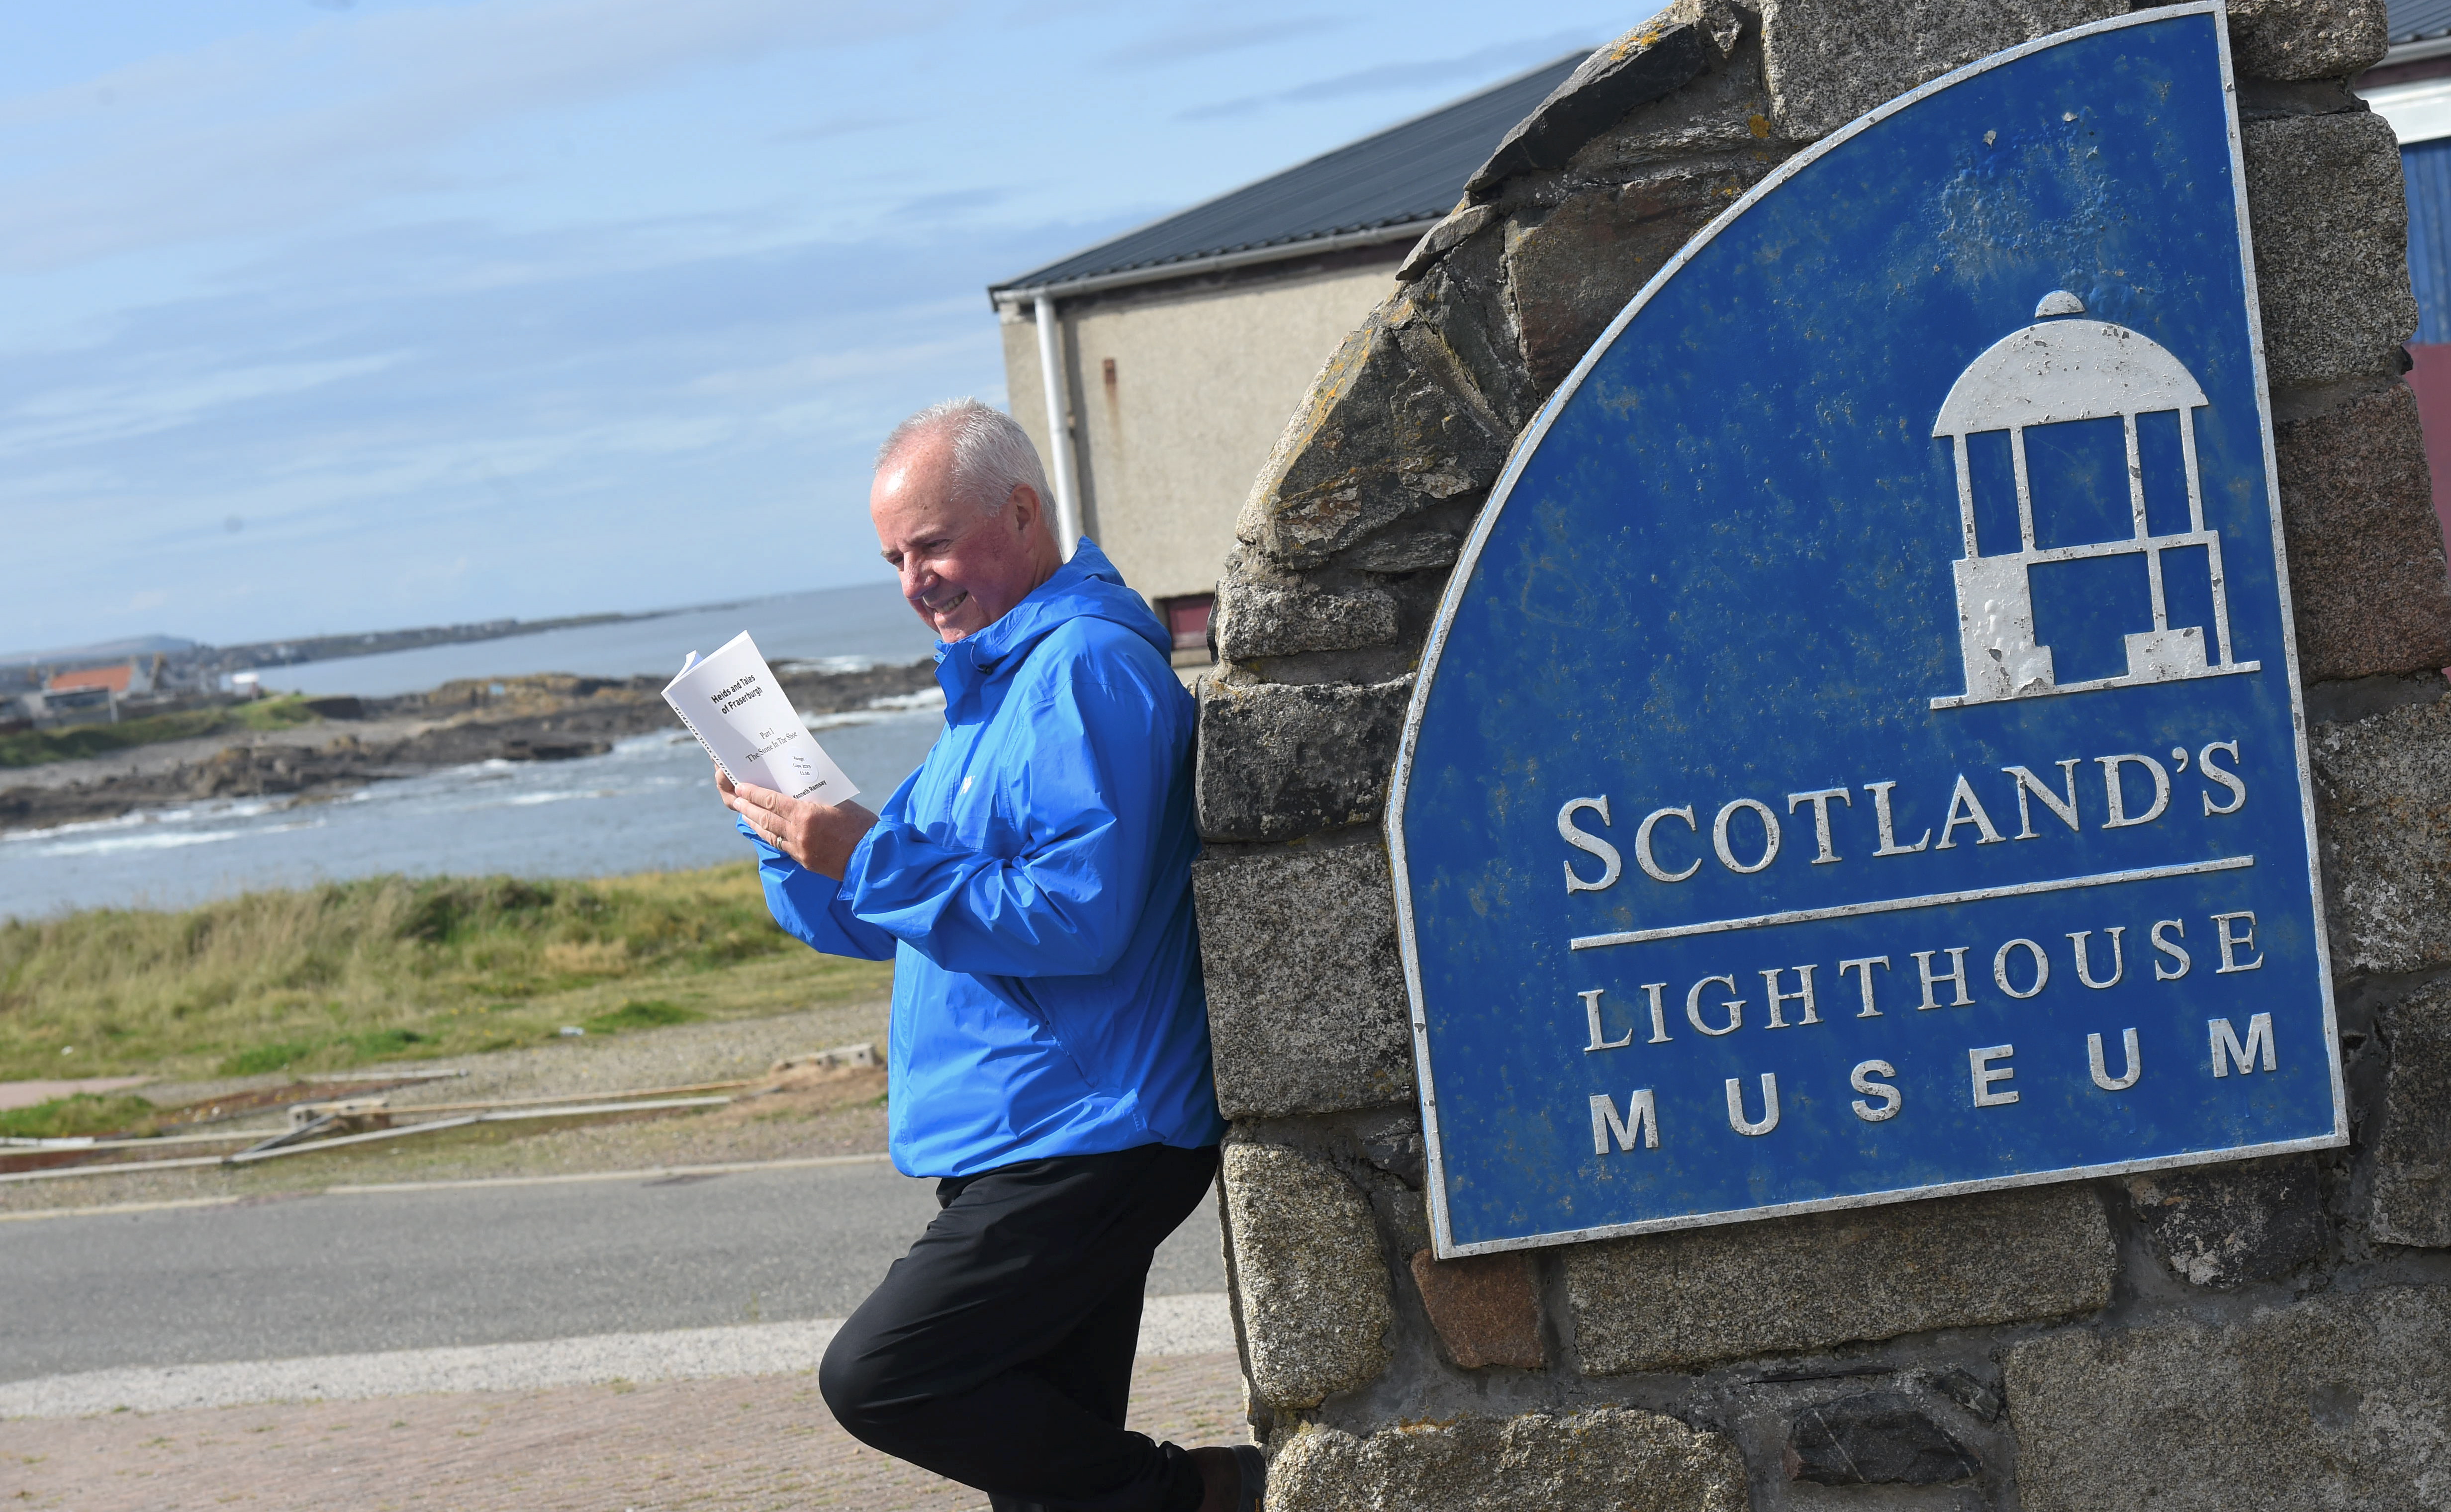 CR0013710
Retired teacher Ken Ramsay (pictured) has penned a novel based on Fraserburgh, inspired by the town, the history and the people.
04/09/19
Picture by HEATHER FOWLIE